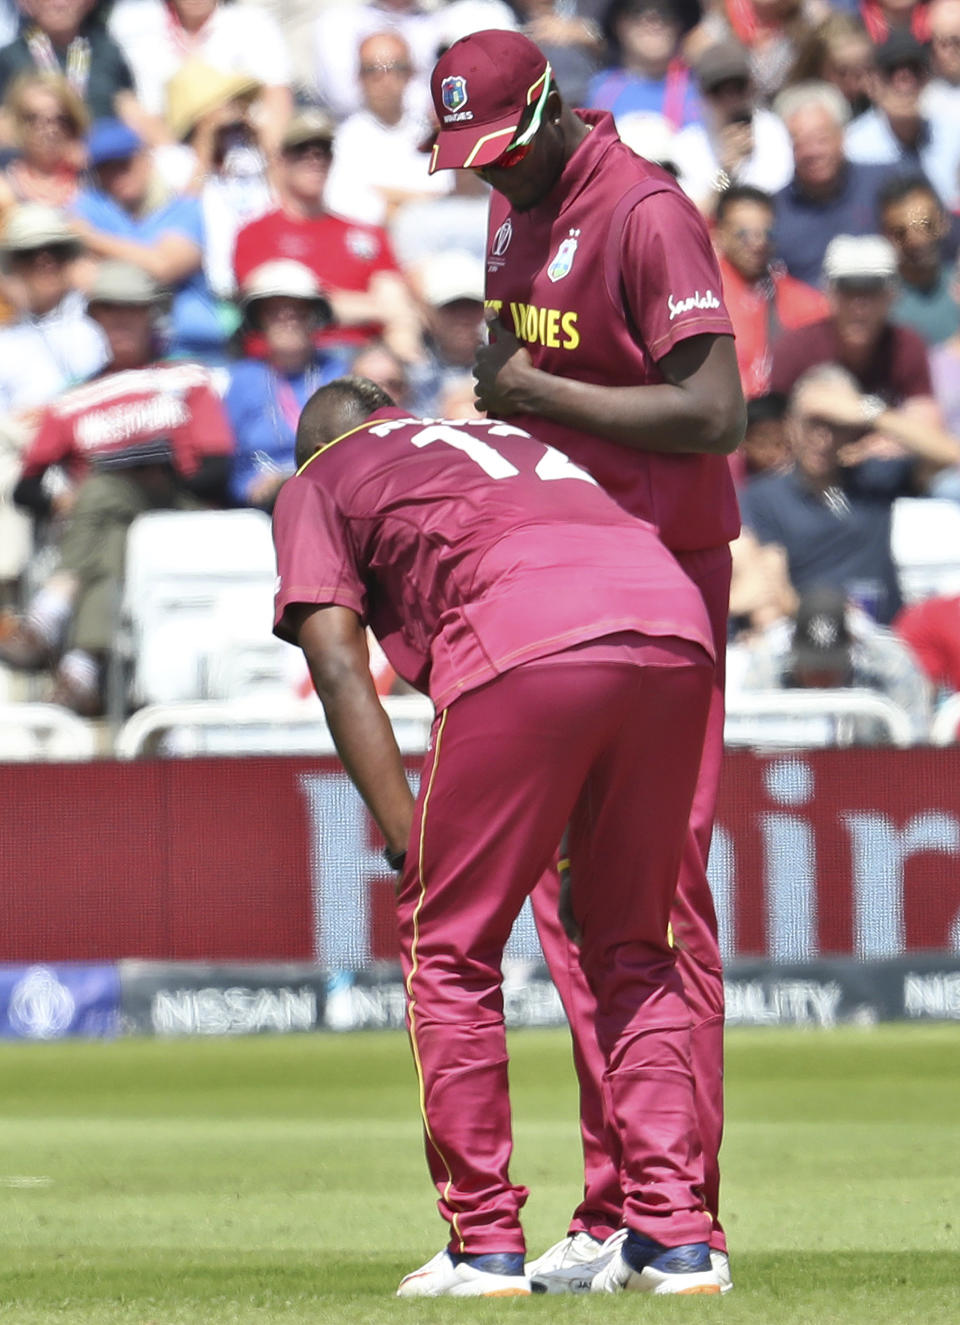 West Indies' captain Jason Holder, right, attend to teammate Andre Russell before he walked off the filed during the Cricket World Cup match between Australia and West Indies at Trent Bridge in Nottingham, Thursday, June 6, 2019. (AP Photo/Rui Vieira)